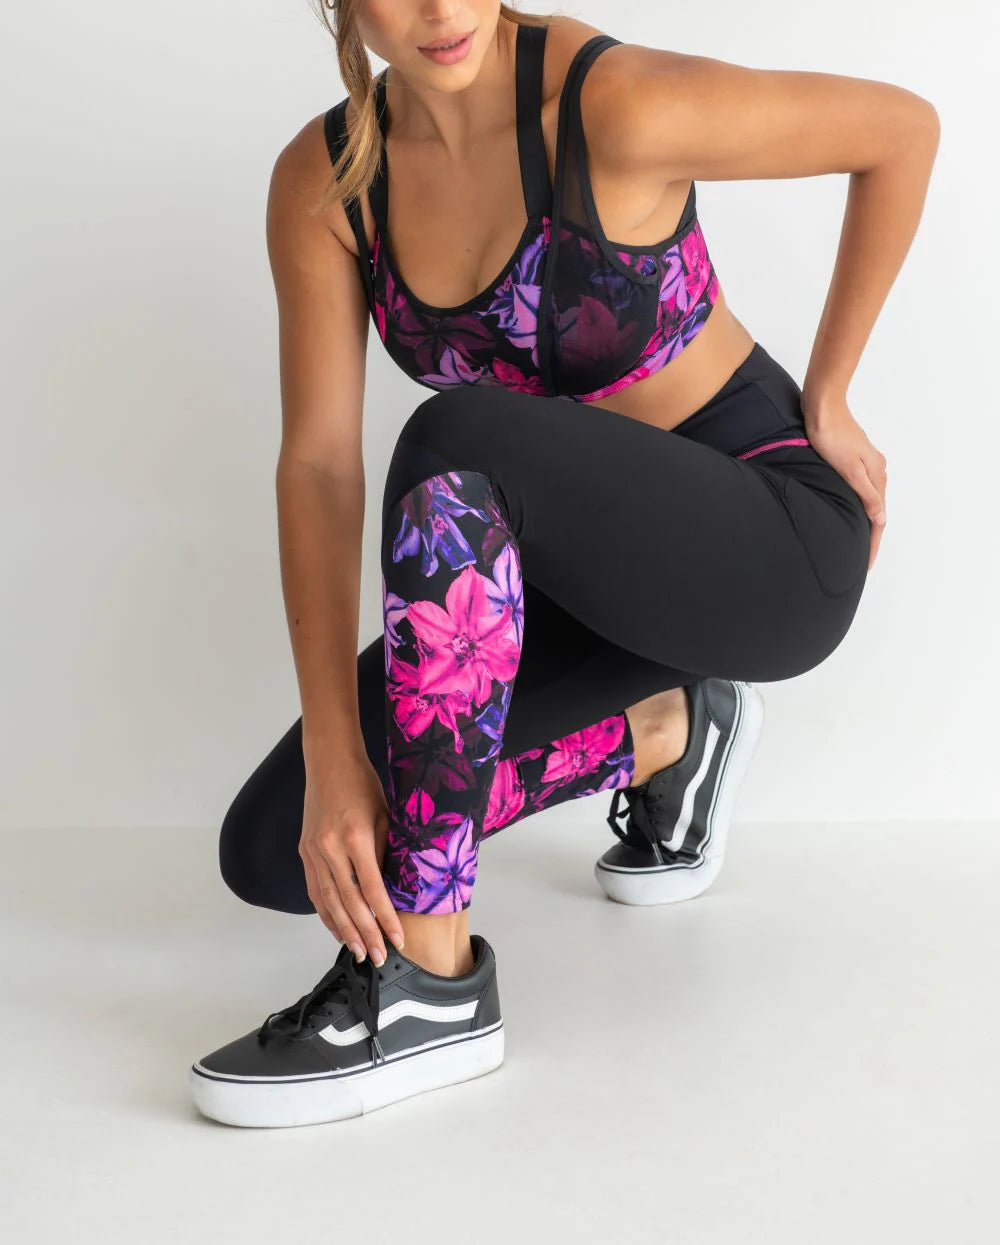 Energy Infinite Double Strap Lightly Padded Convertible Sports Bra in Black Floral - Pour Moi